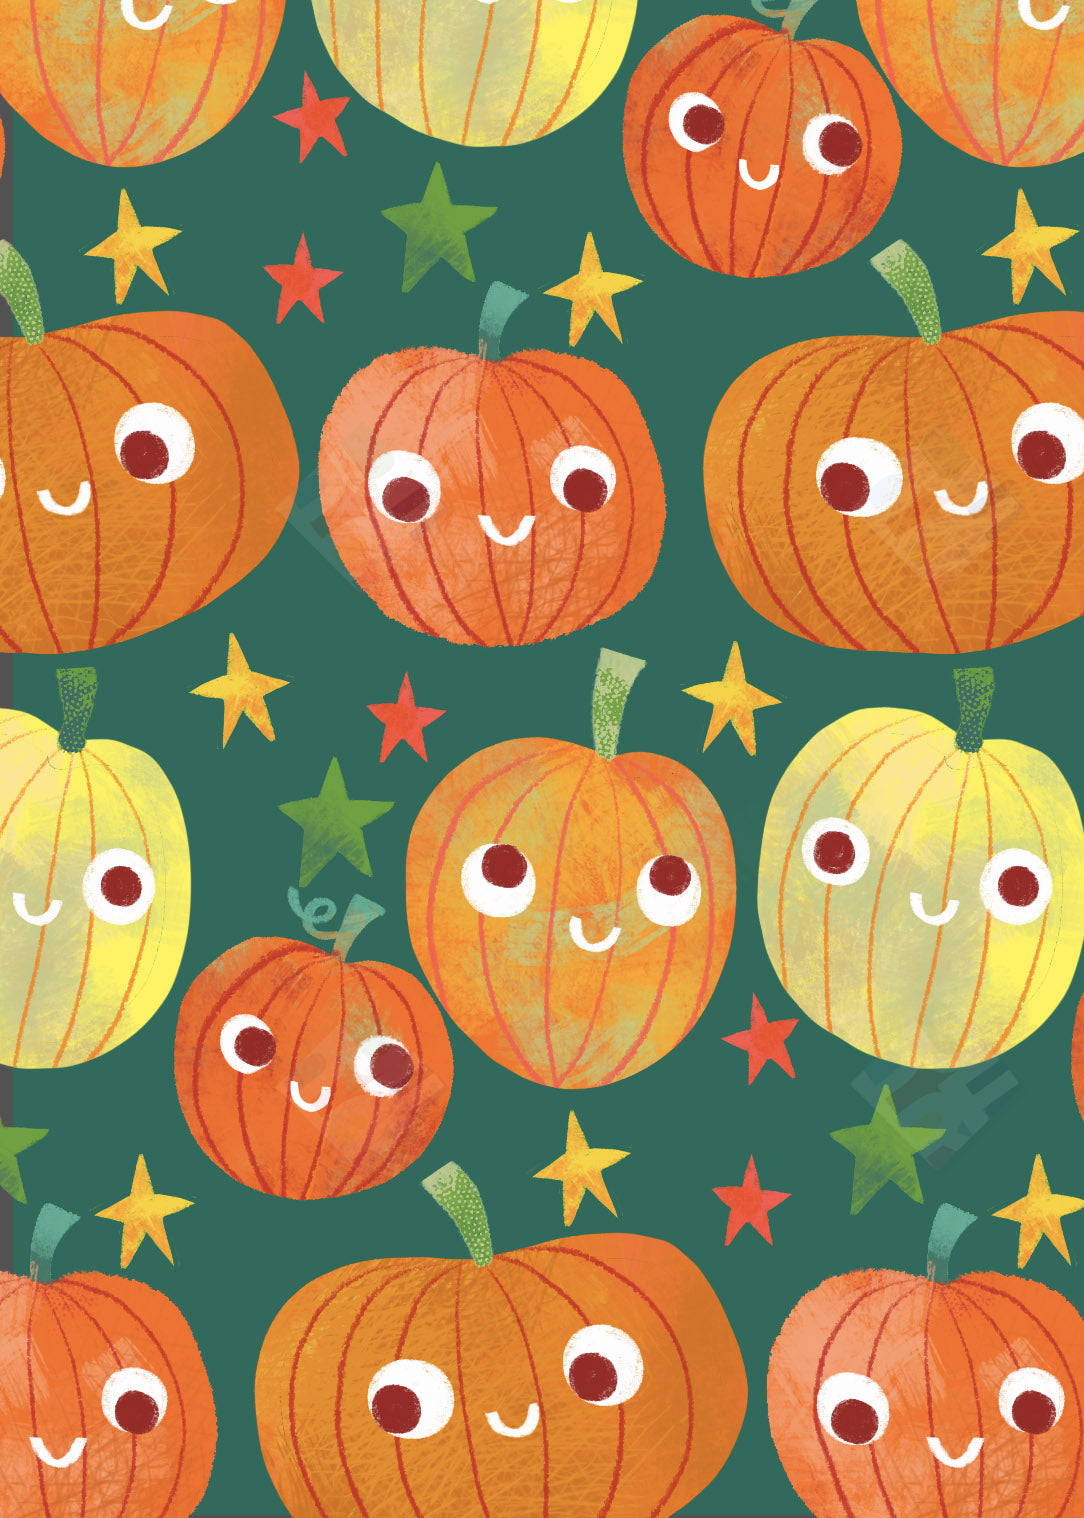 Pumpkin Pattern by Fhiona Galloway - Pure Art Licensing Agency